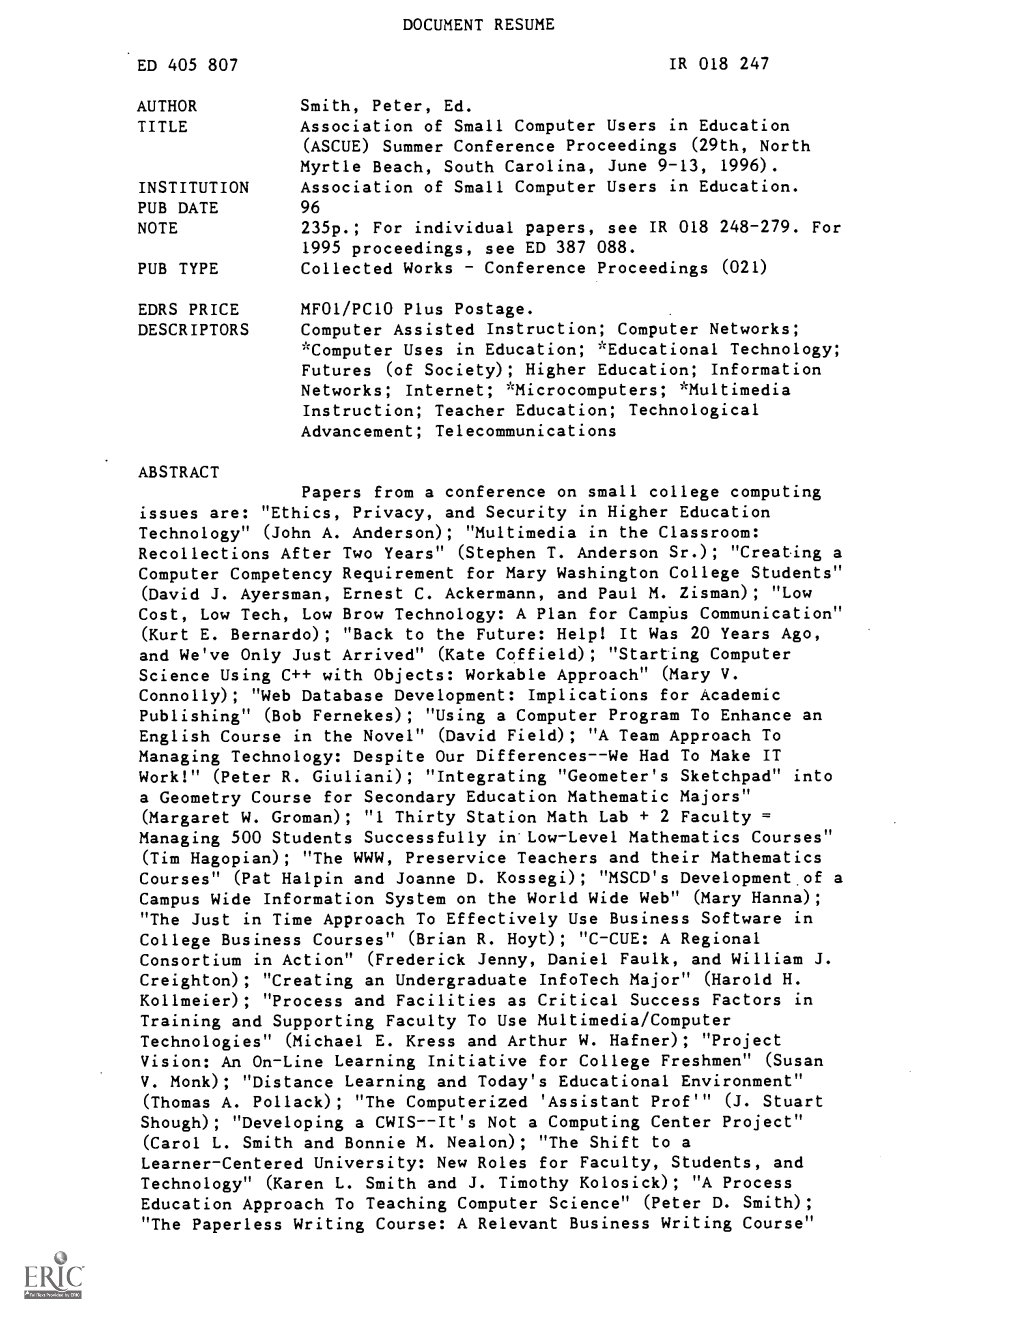 Association of Small Computer Users in Education (ASCUE) Summer Conference Proceedings (29Th, North Myrtle Beach, South Carolina, June 9-13, 1996)